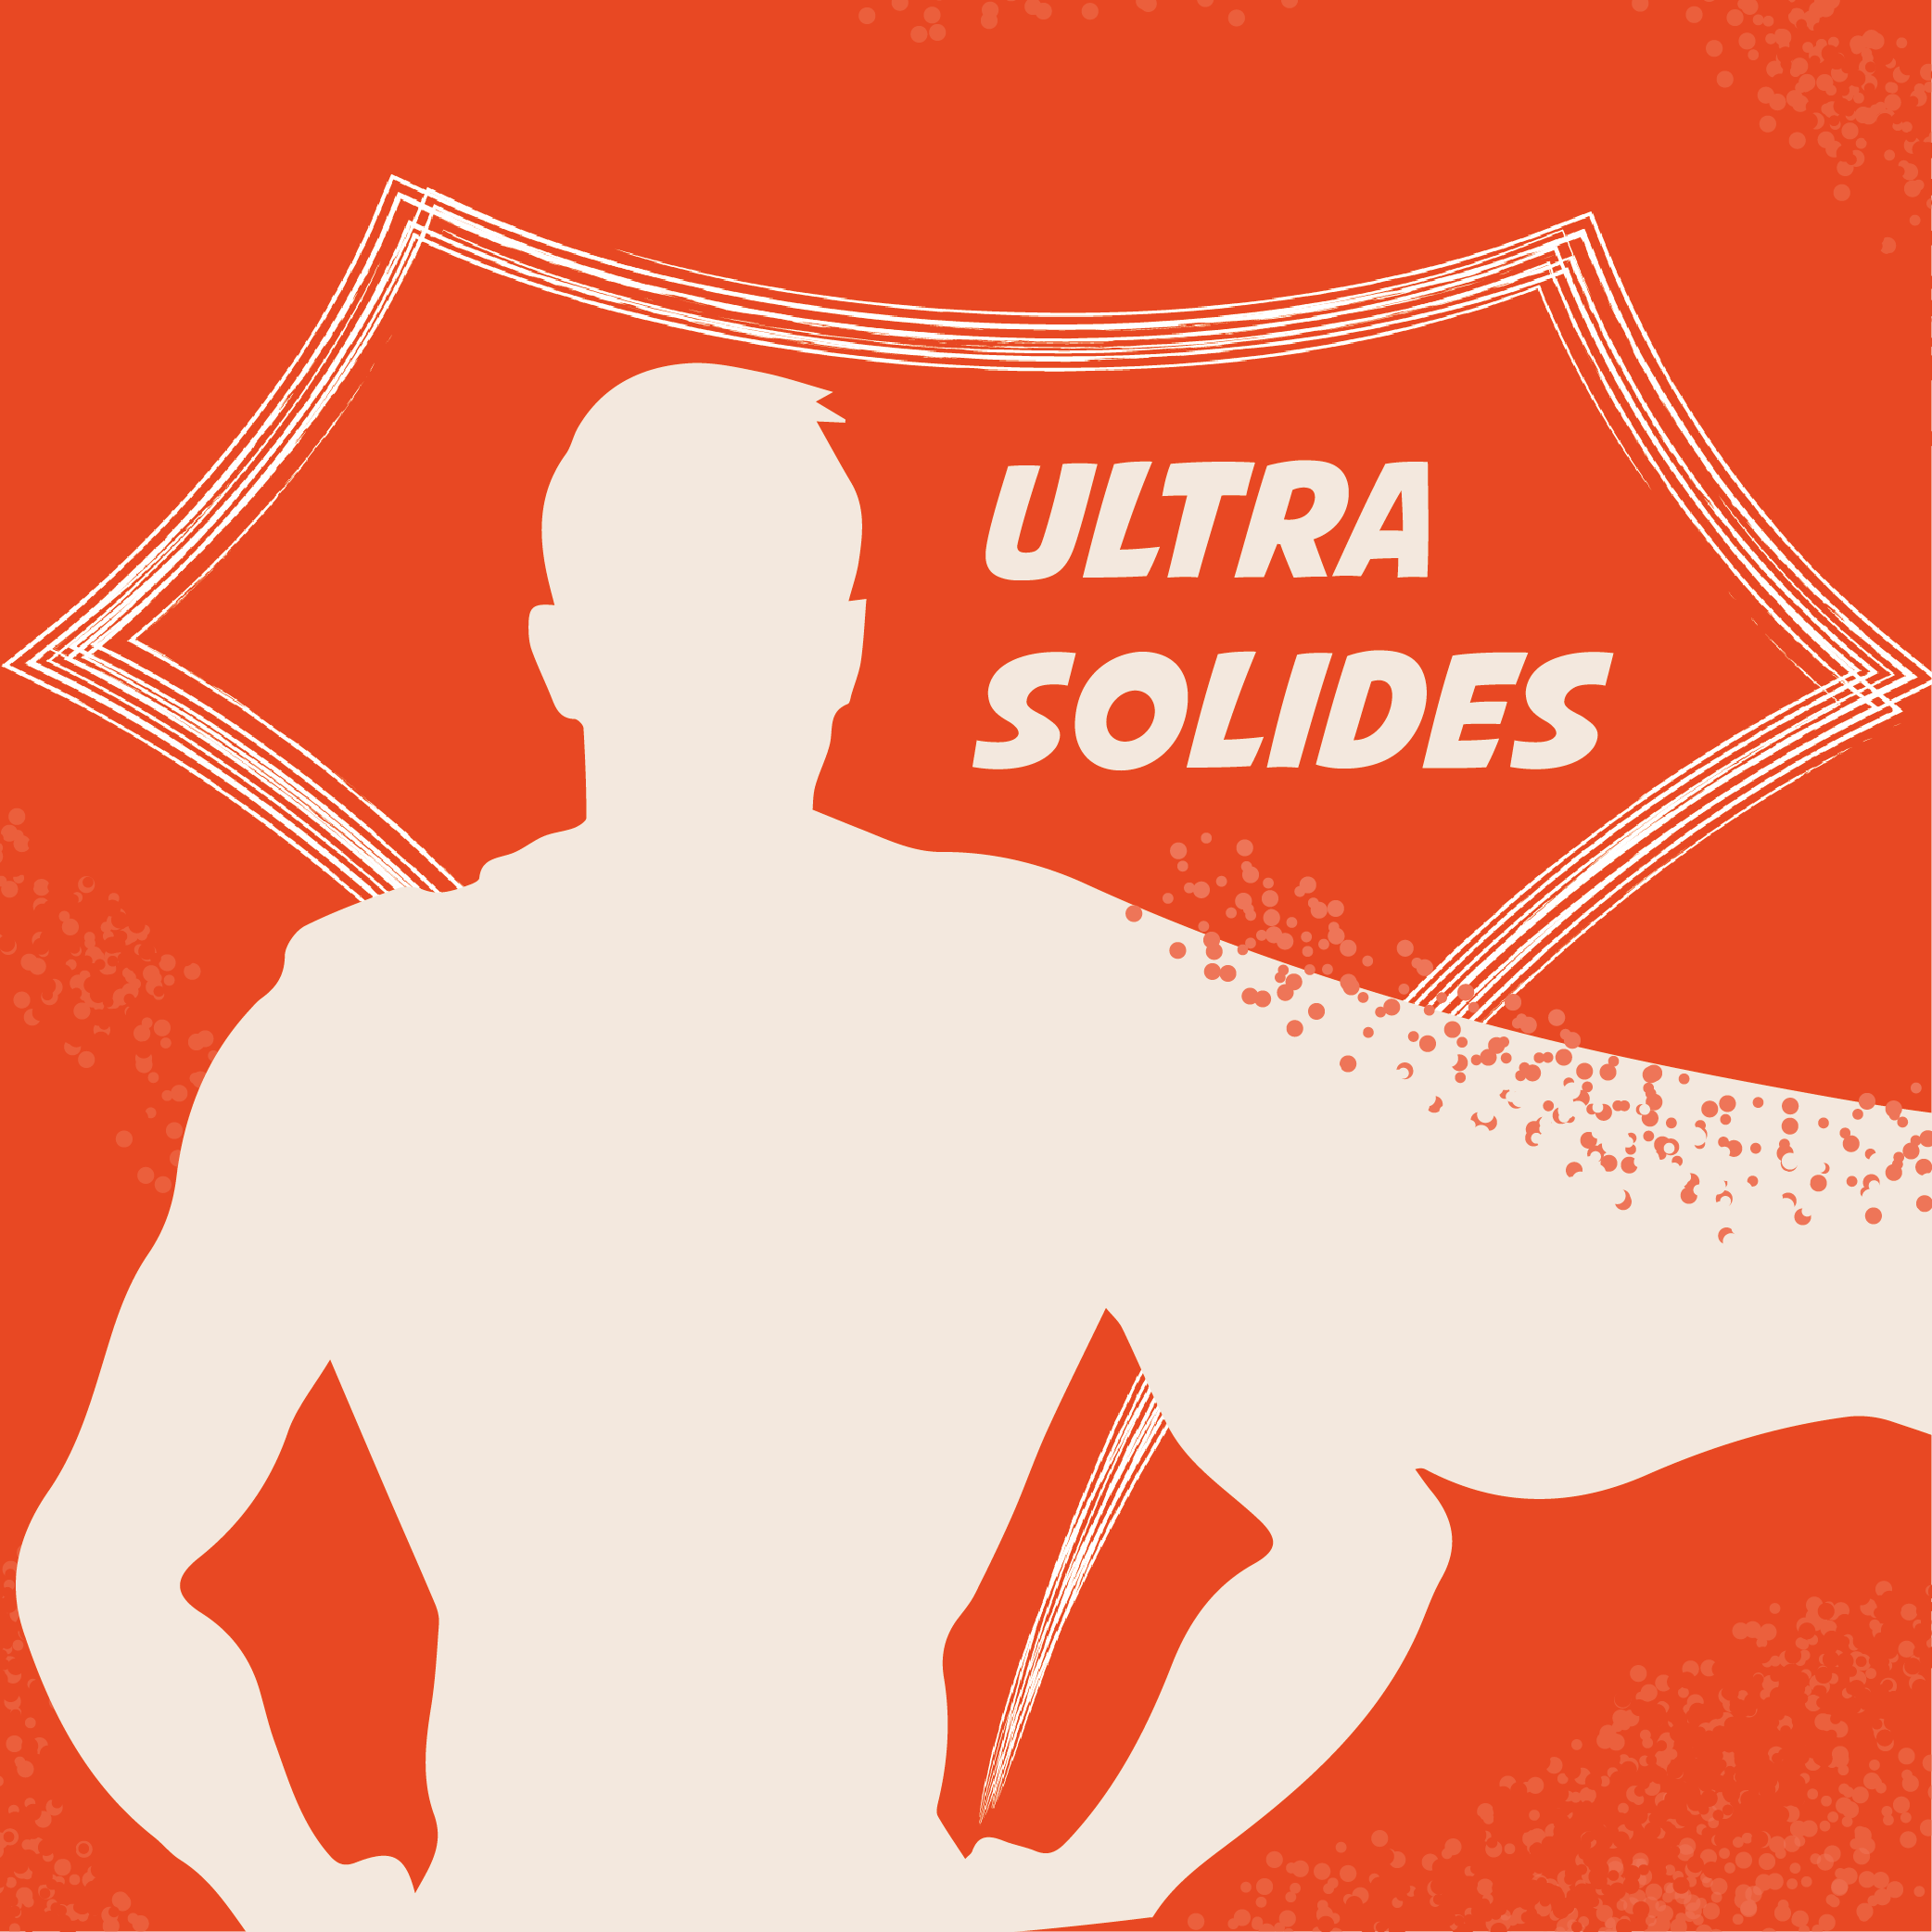 Ultra solides